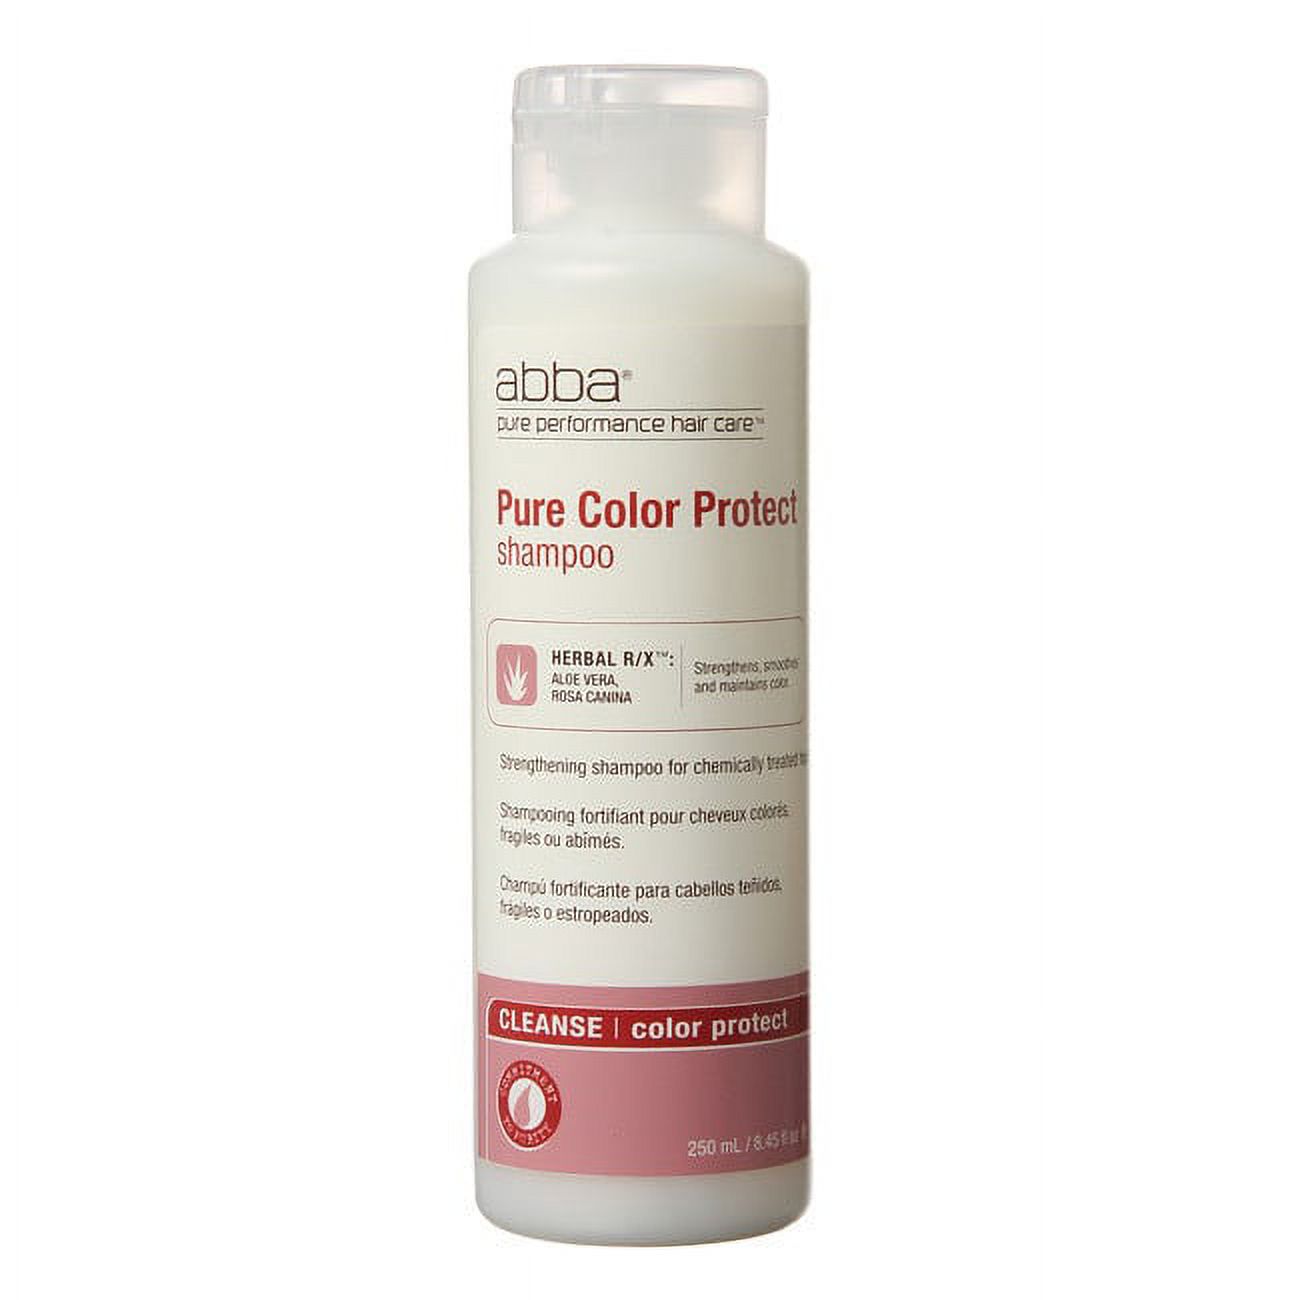 Abba Pure Color Protection Shampoo (33.8 oz / liter) - image 2 of 3